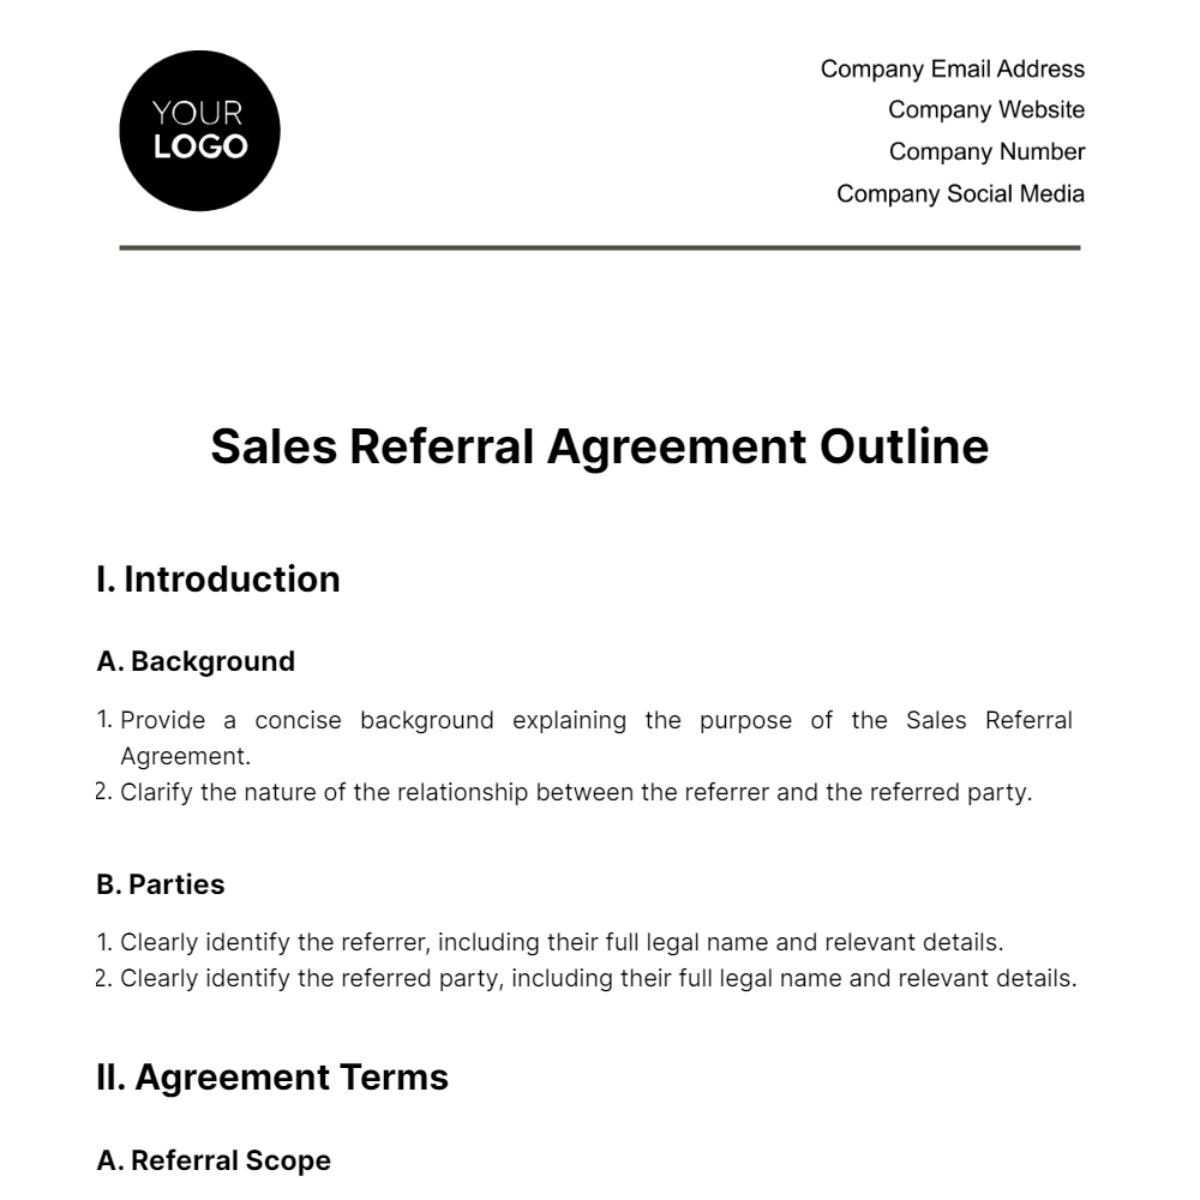 Free Sales Referral Agreement Outline Template